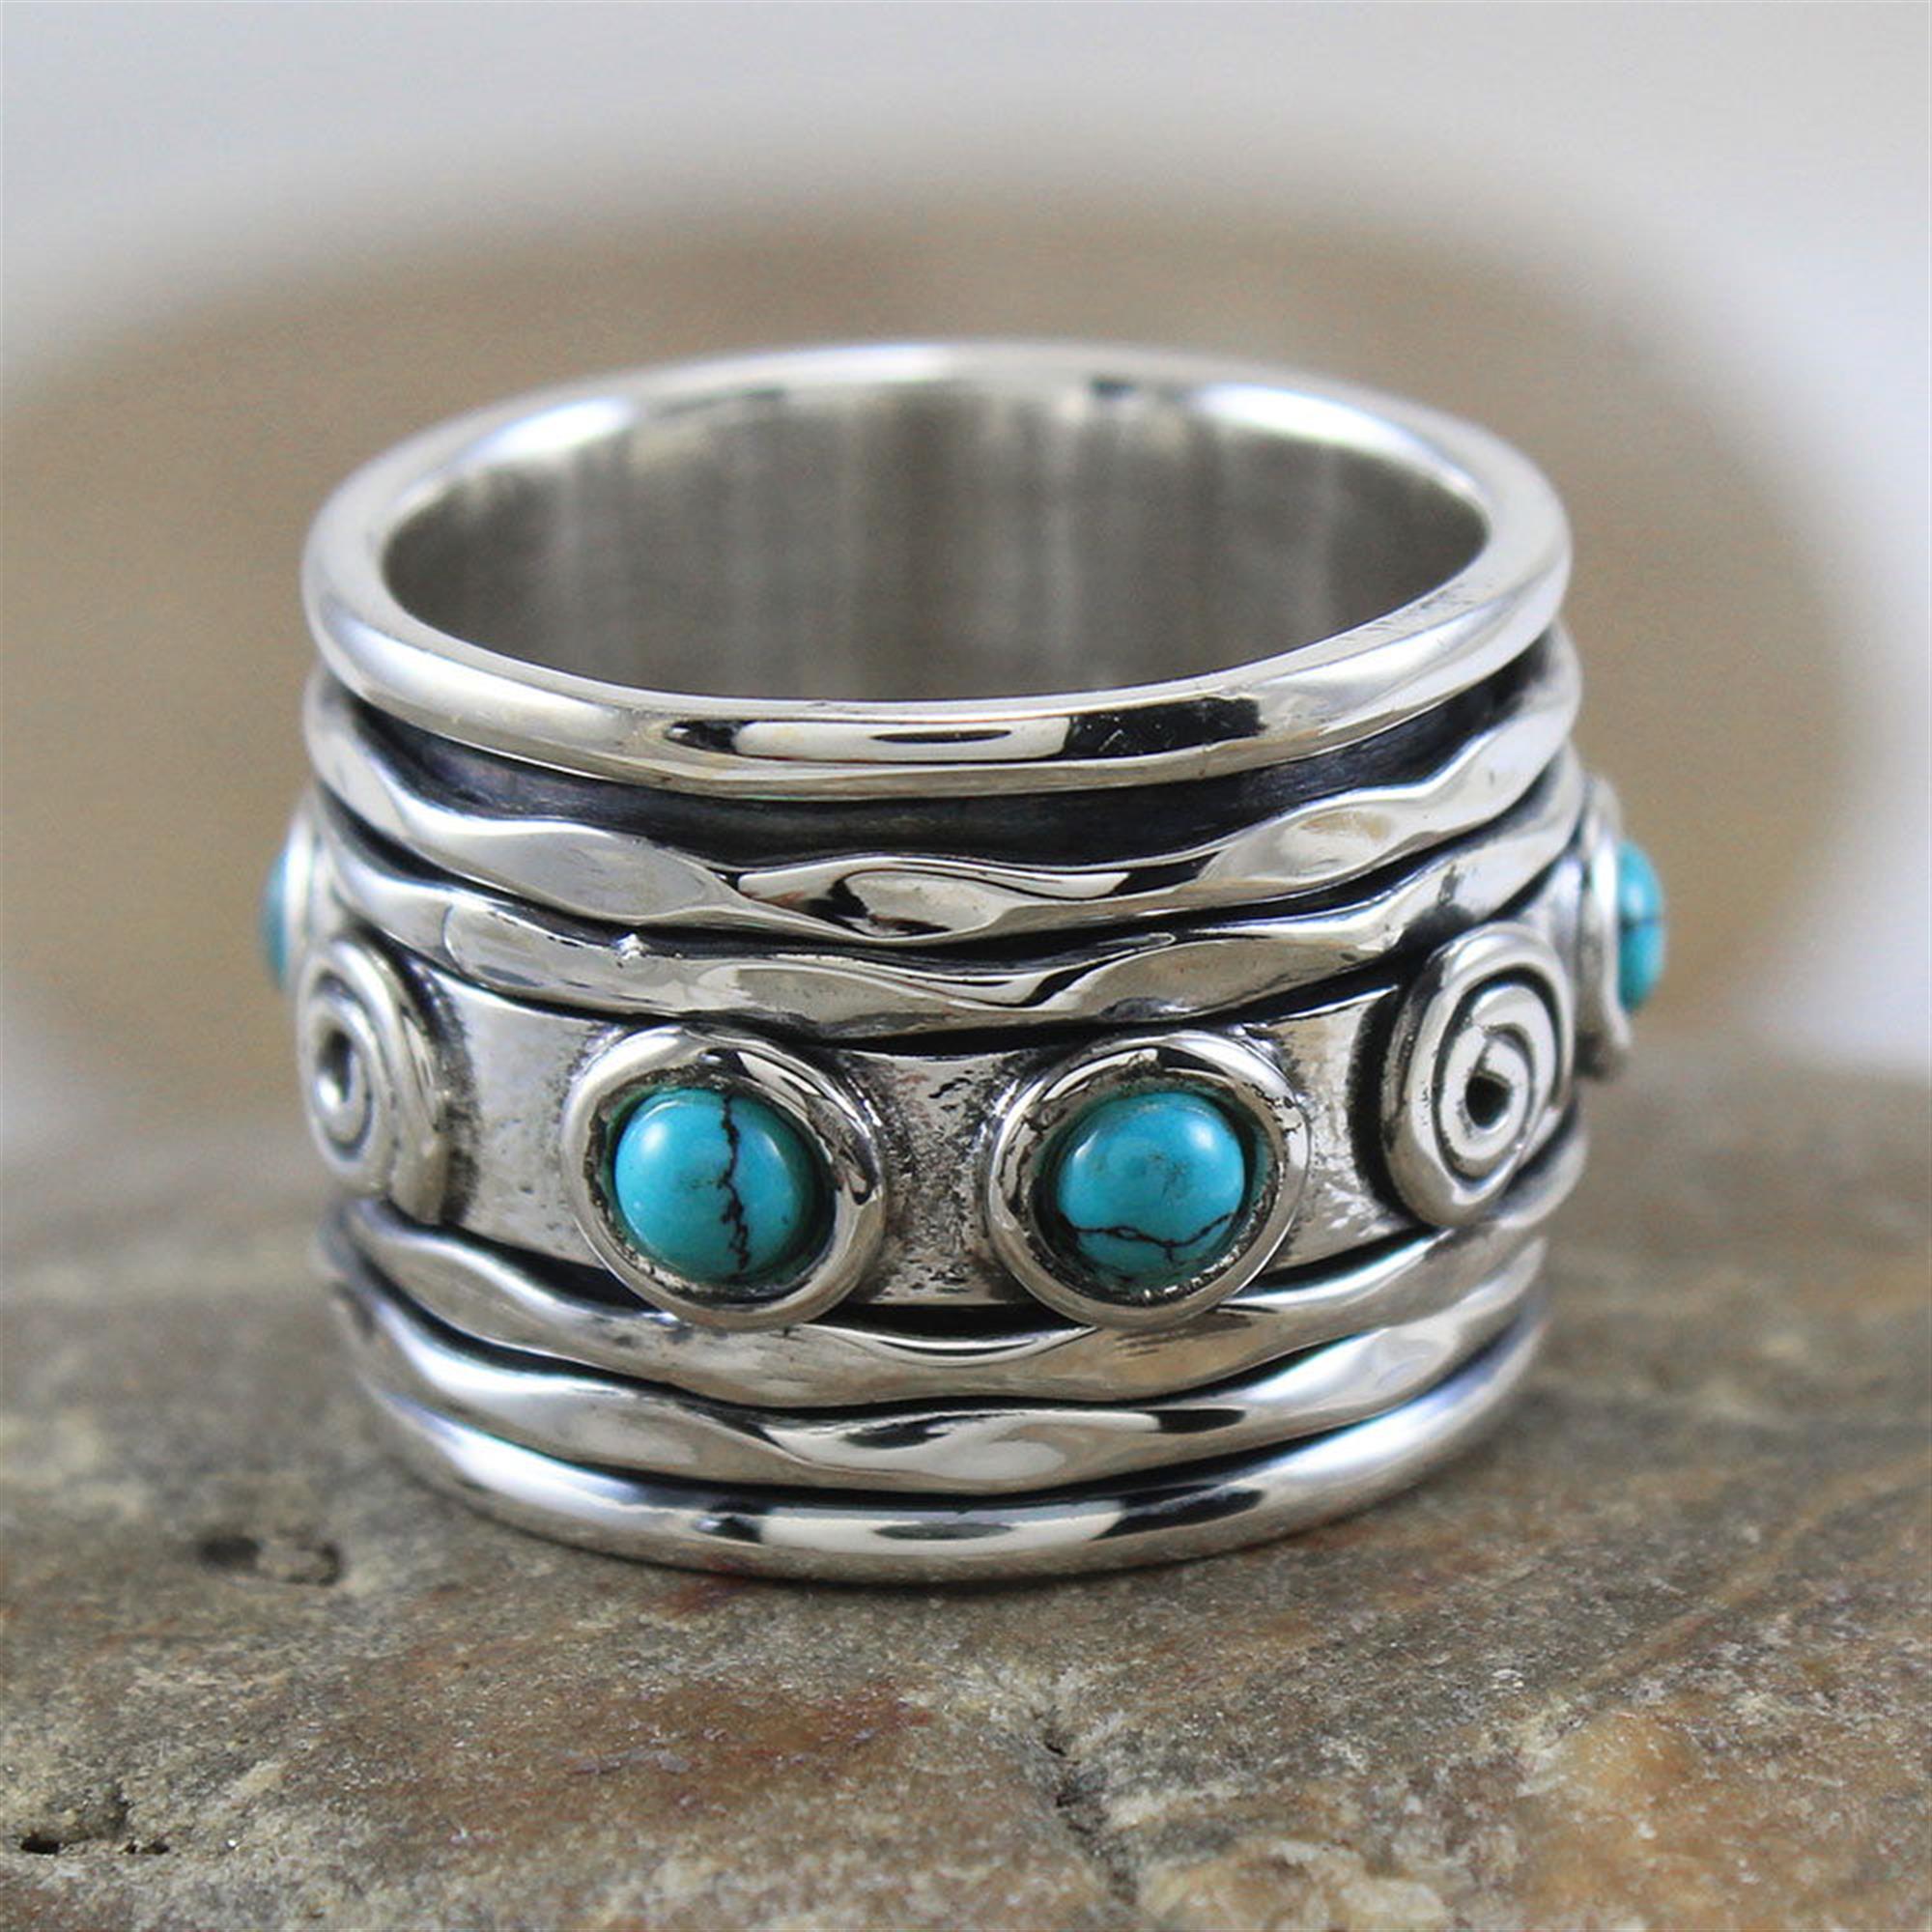 Turquoise Ring 925 Sterling Silver Spinner Ring Meditation Handmade Jewelry A394 